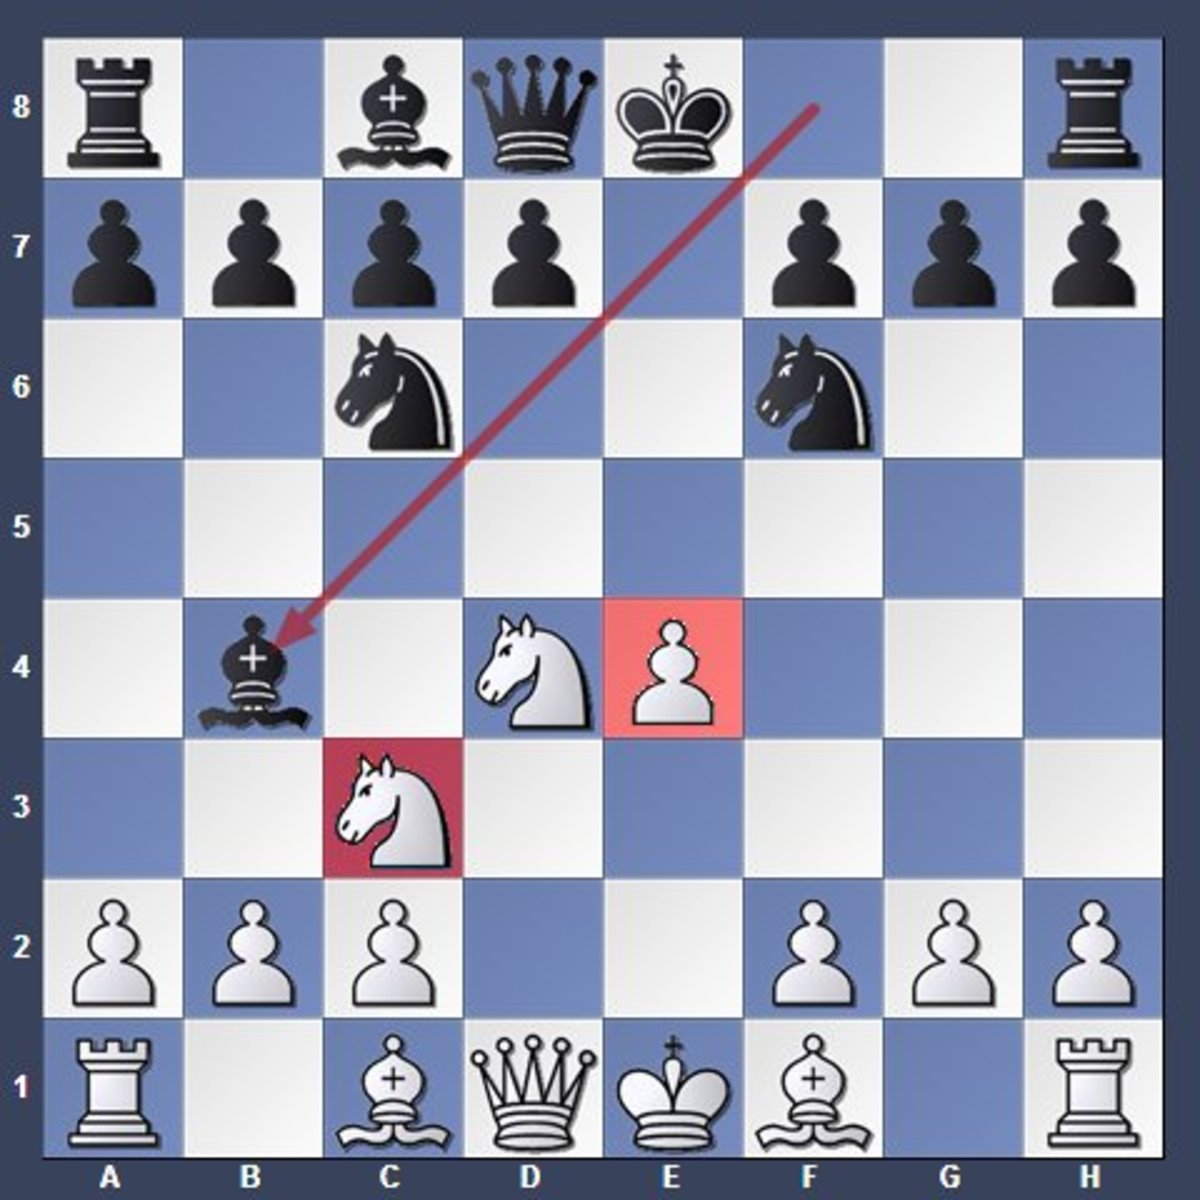 SayChessClassical's Blog • How to Make a Custom Chessable Opening Course  Based on Win% •